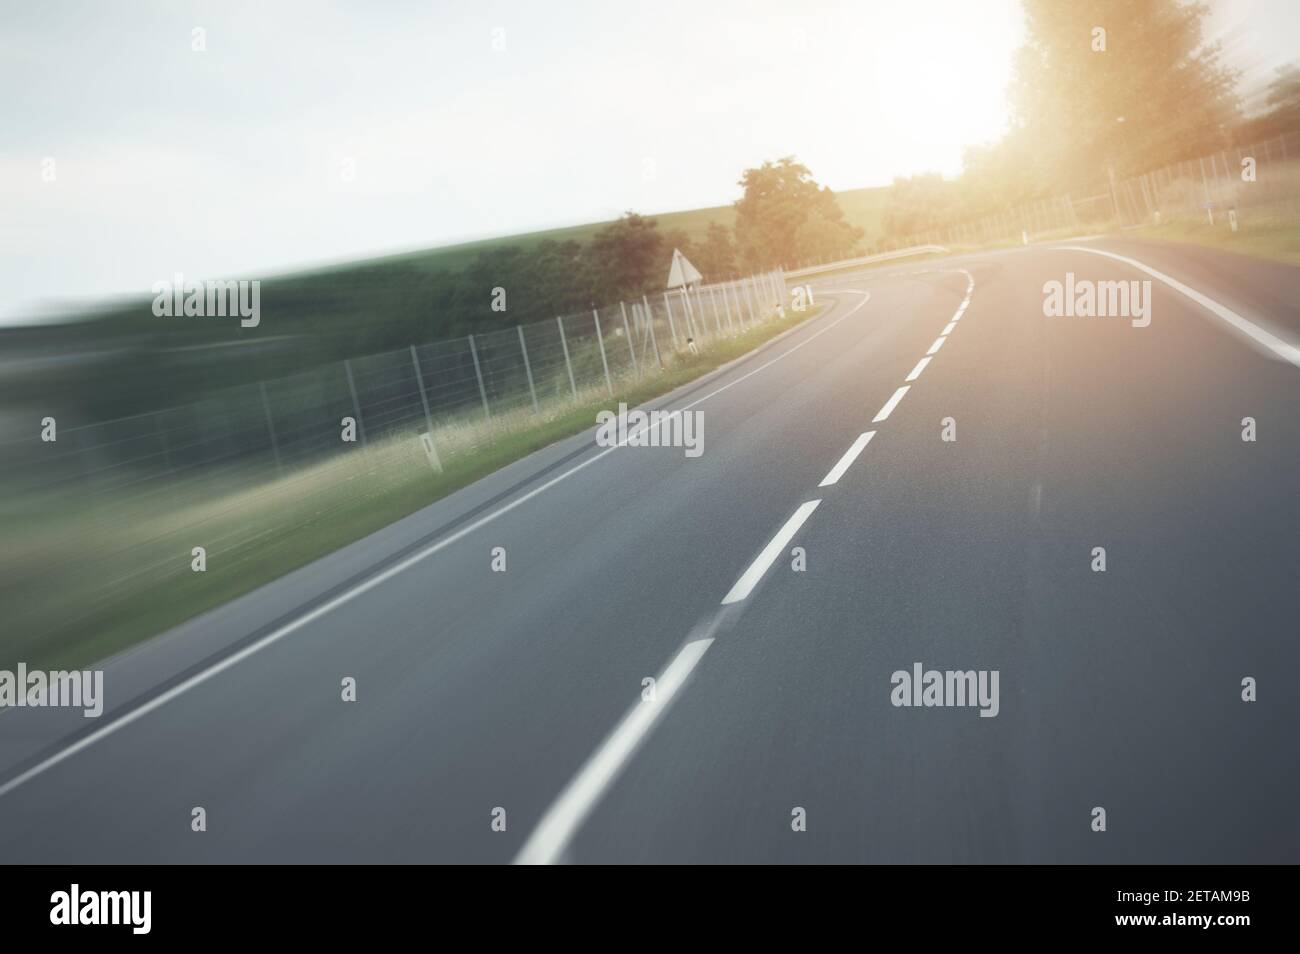 Driving Destination Theme. Speeding on the Highway. New and Modern Highway Drive with Motion Blur Effect. Stock Photo